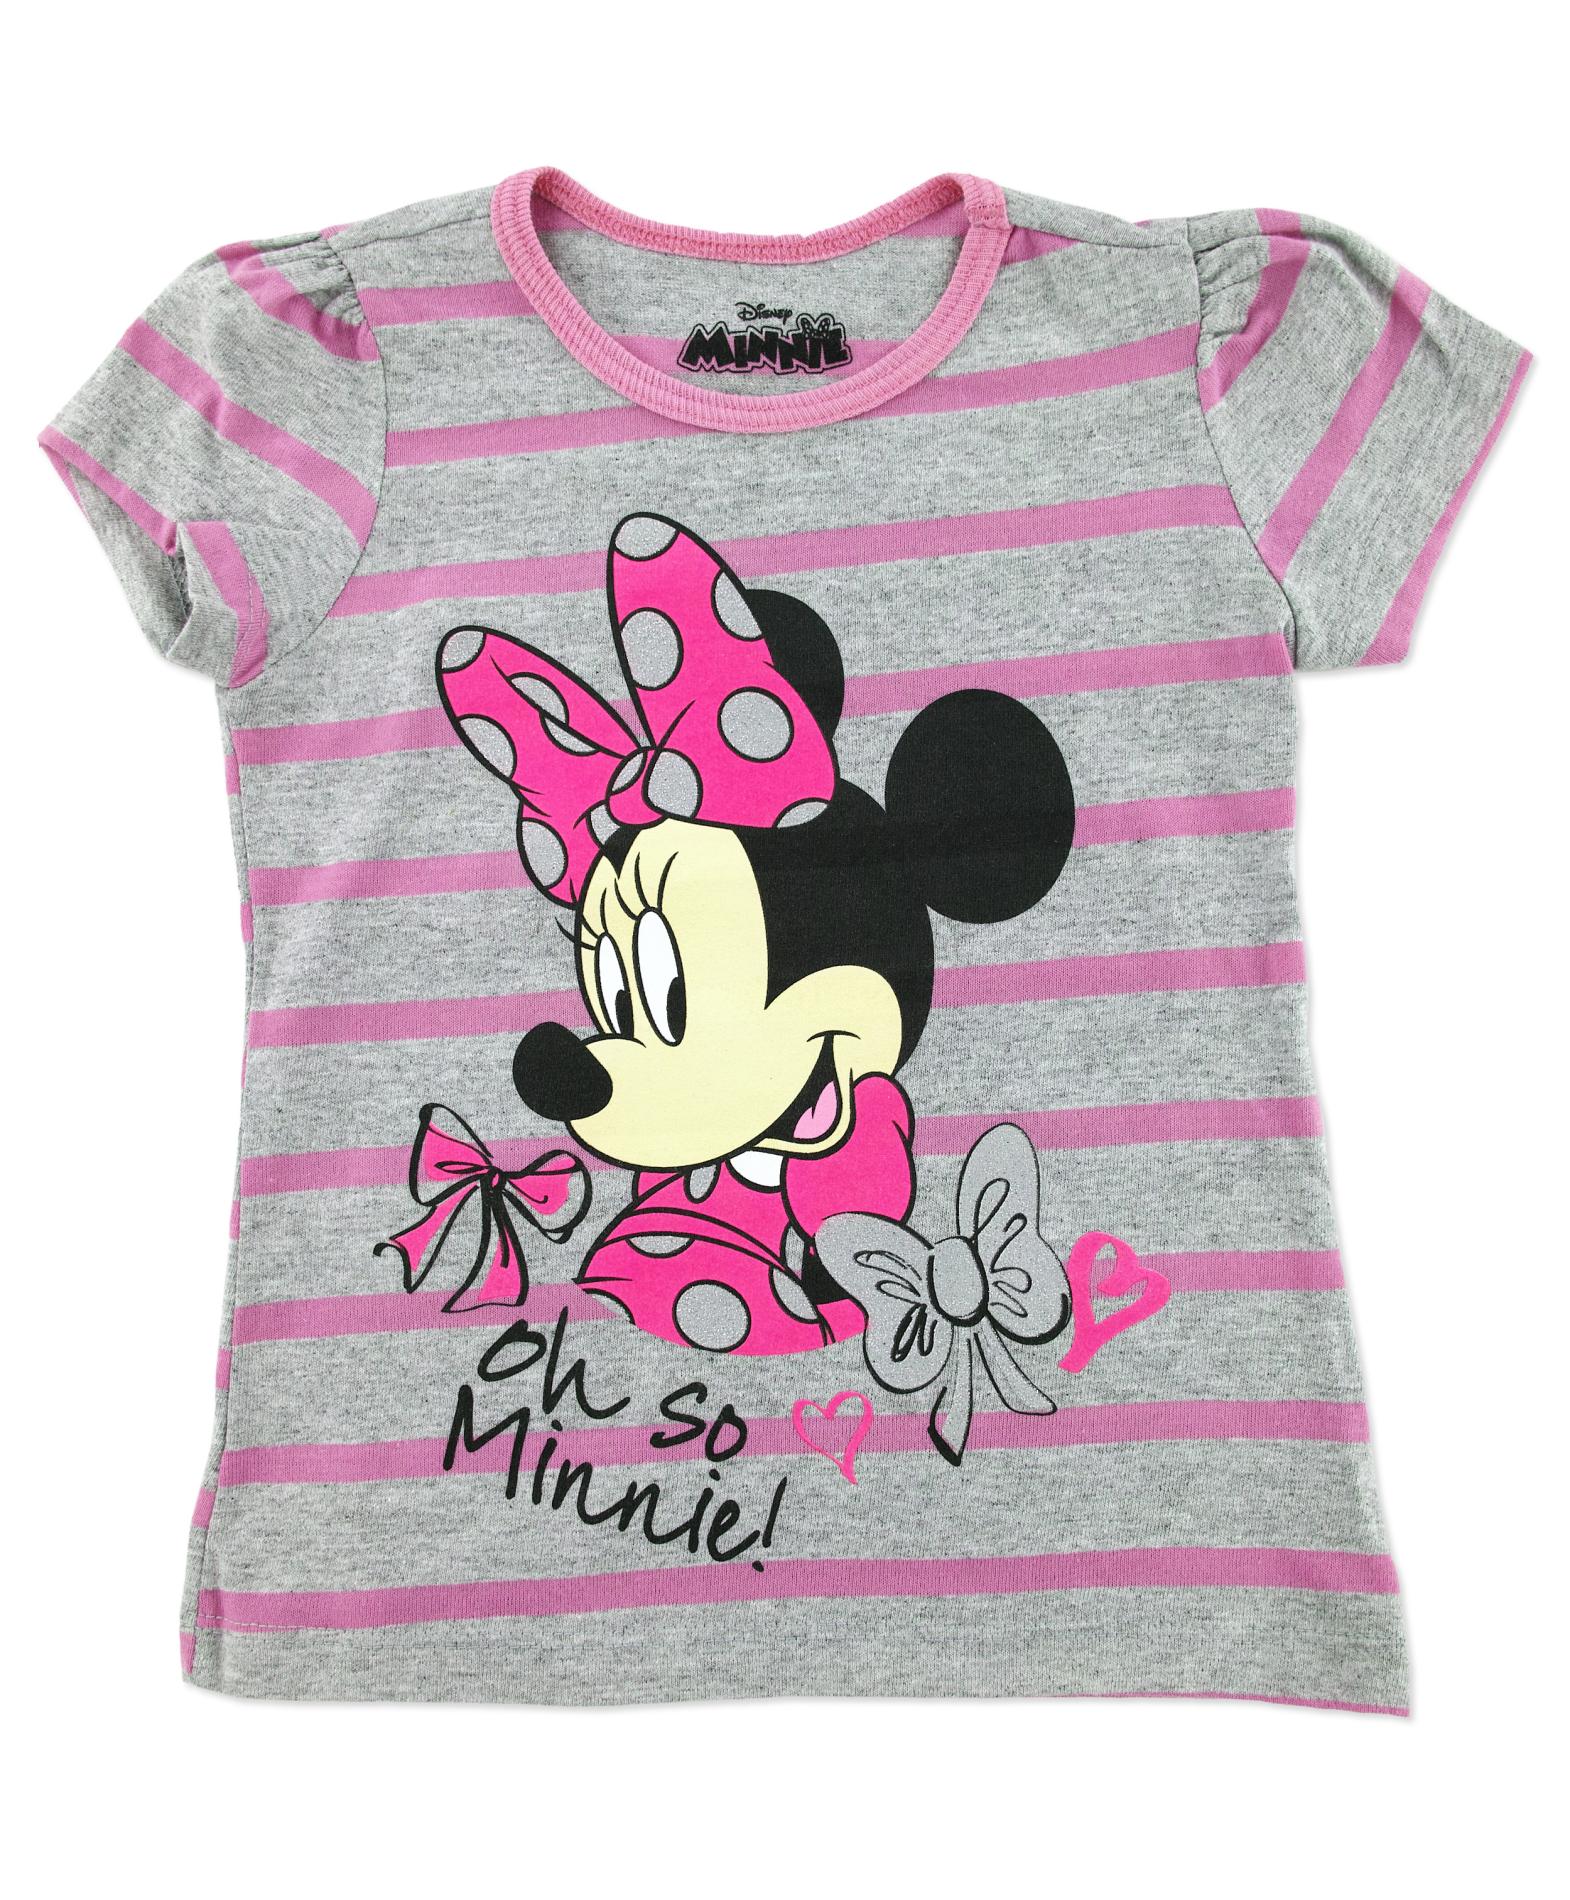 Disney Minnie Mouse Toddler Girl's Graphic T-Shirt - Oh So Minnie